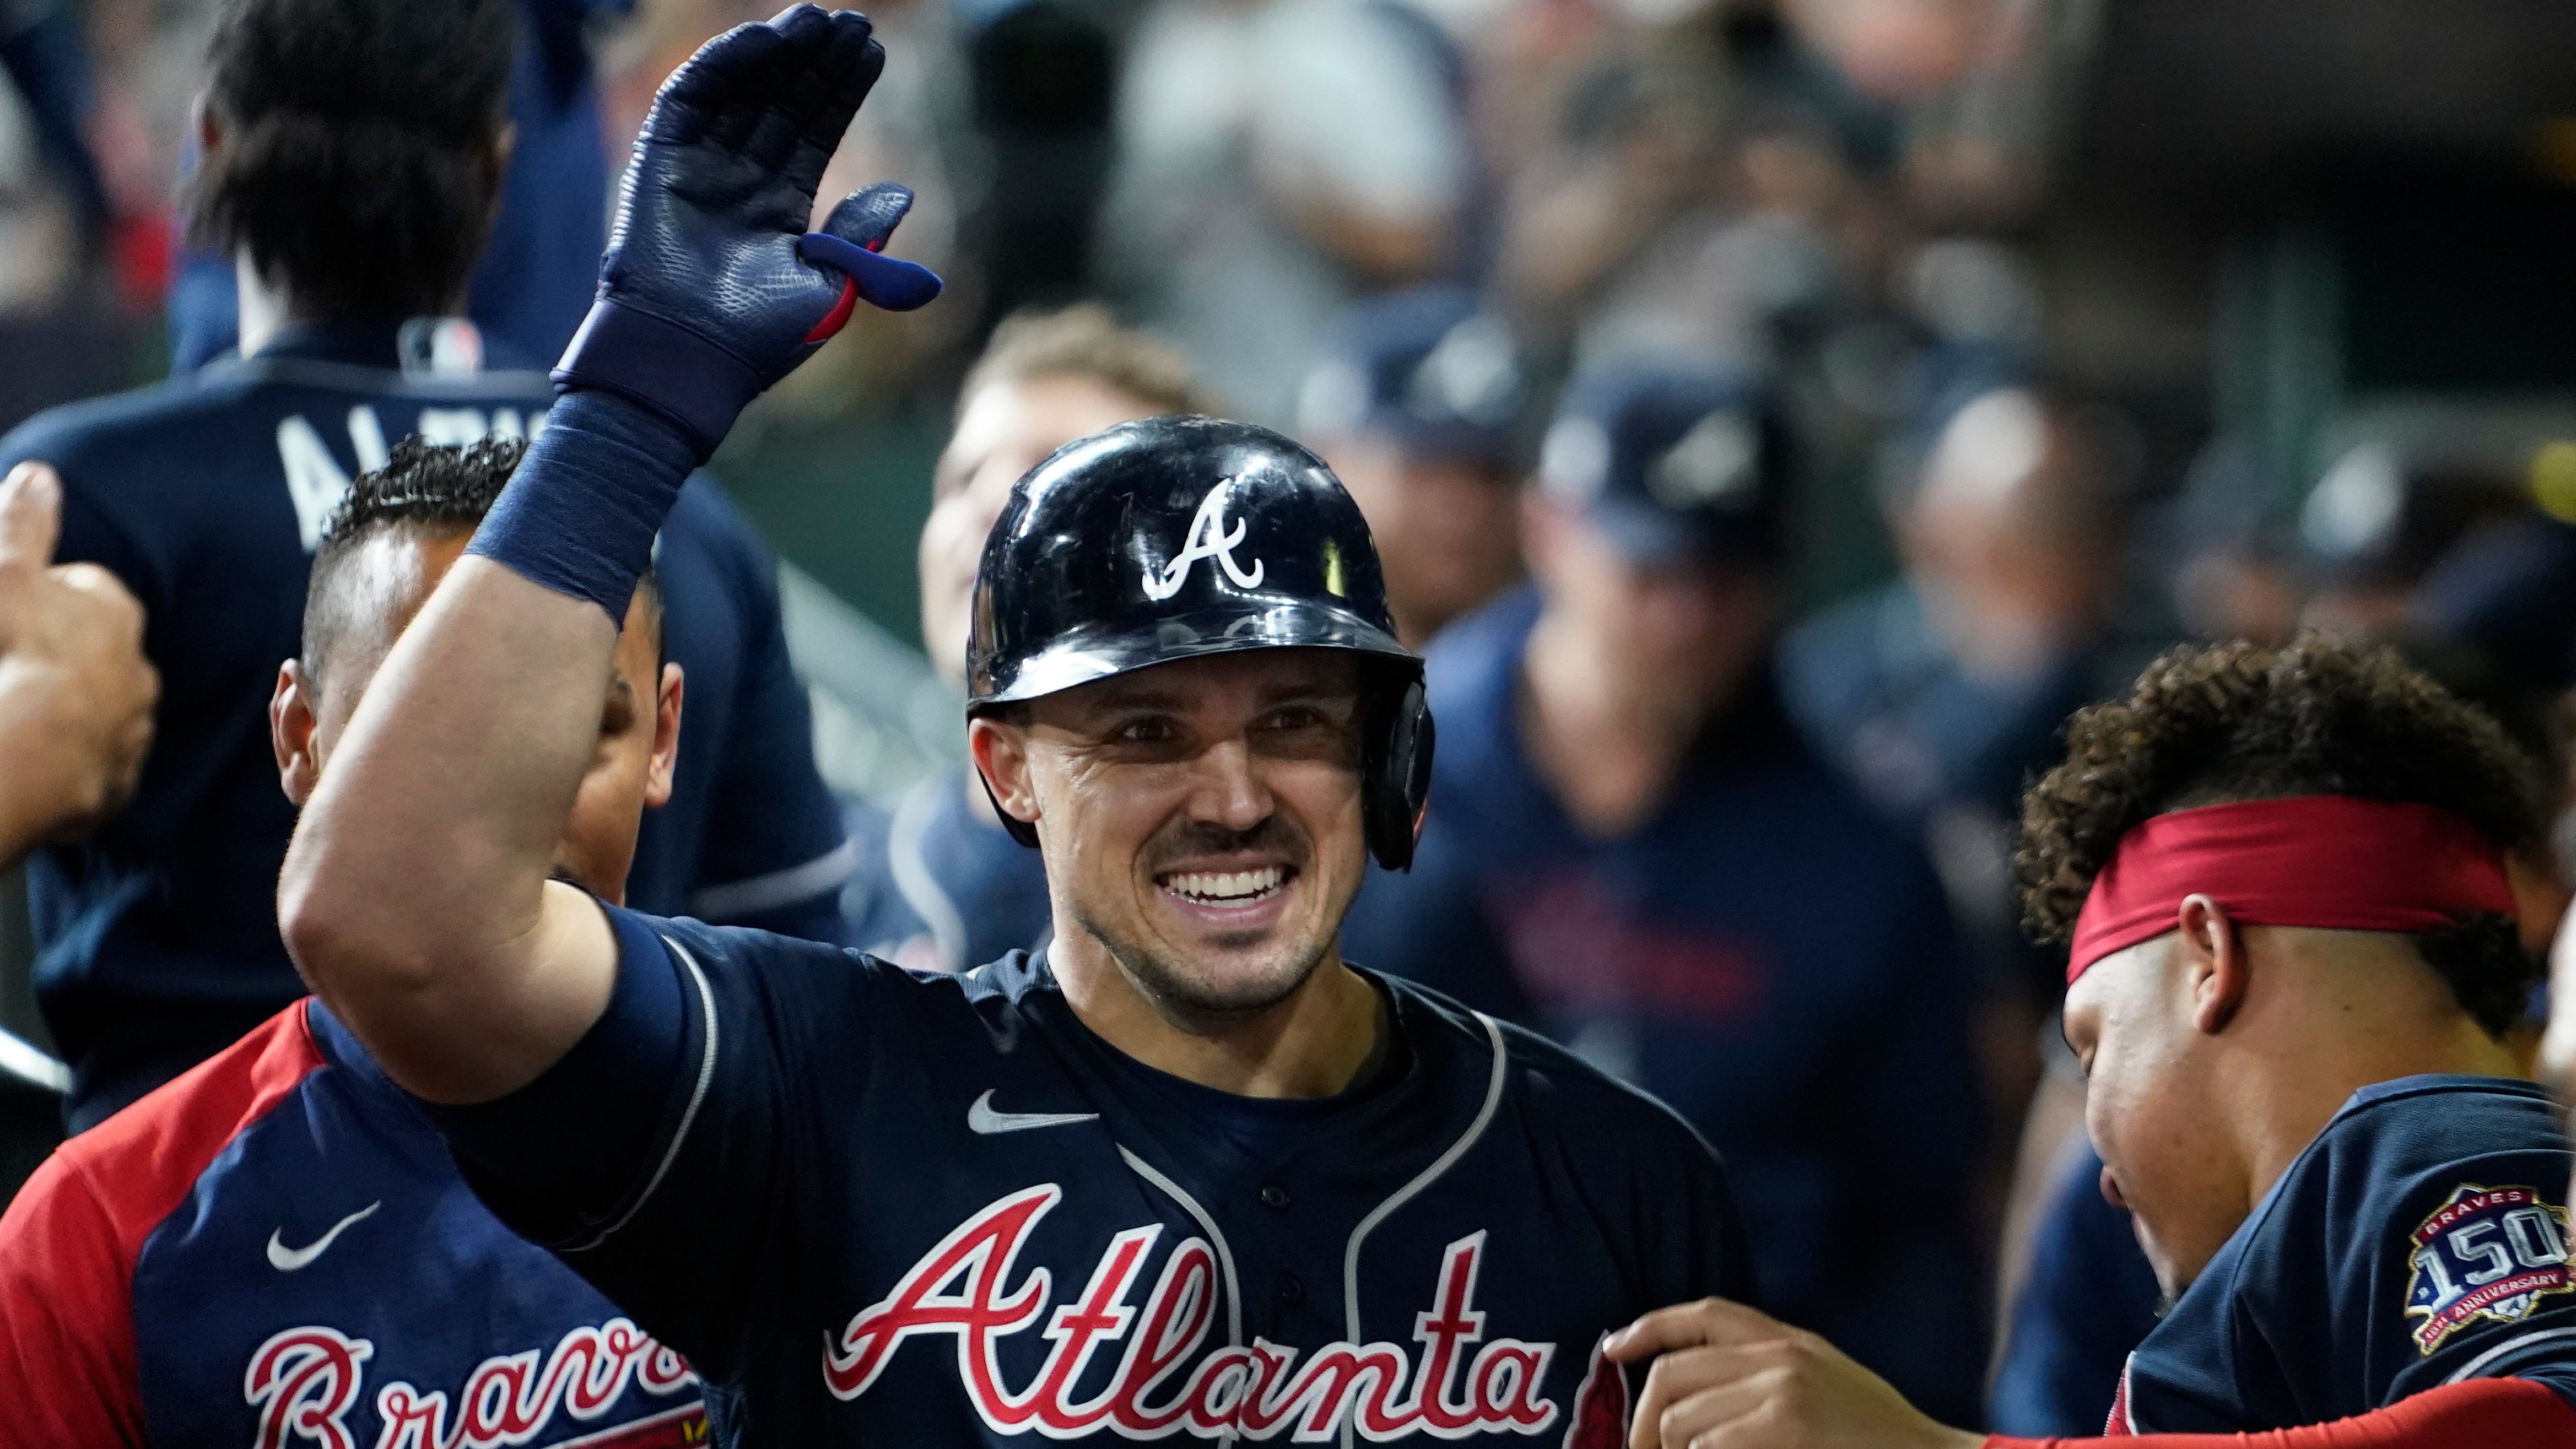 Charlie Morton injury: Braves pitcher out for World Series after